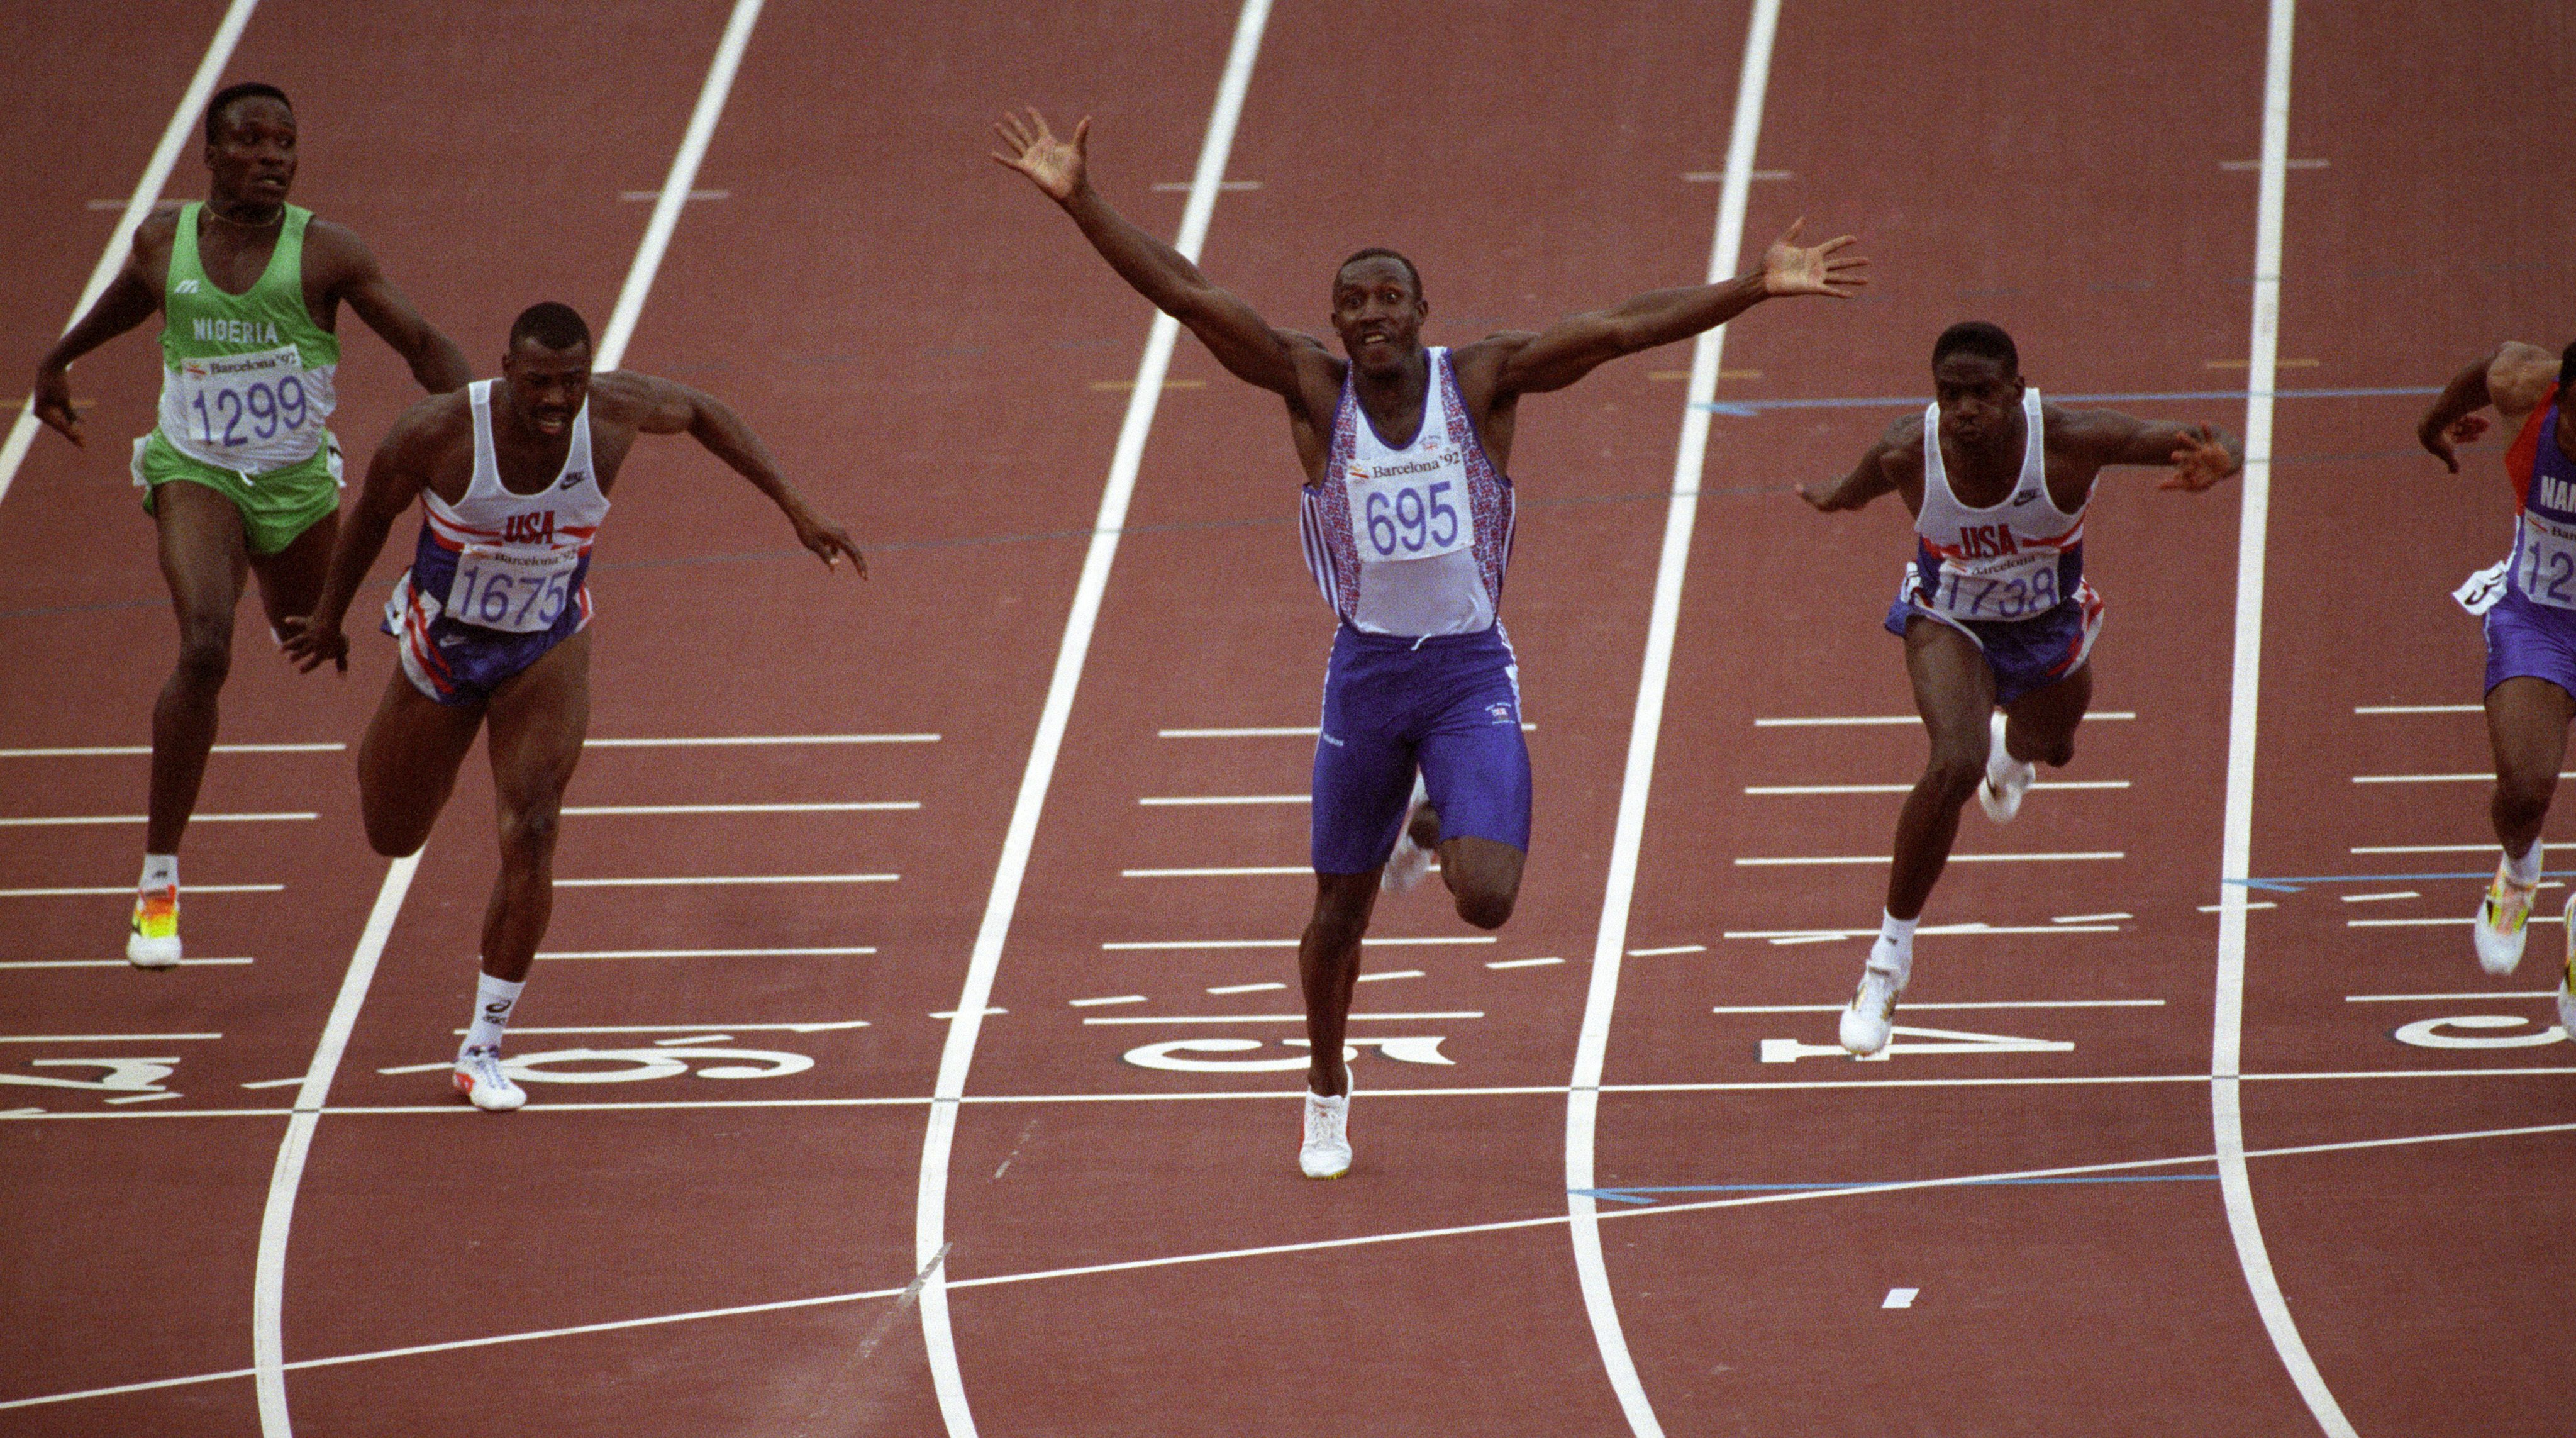 linford christie contact lenses